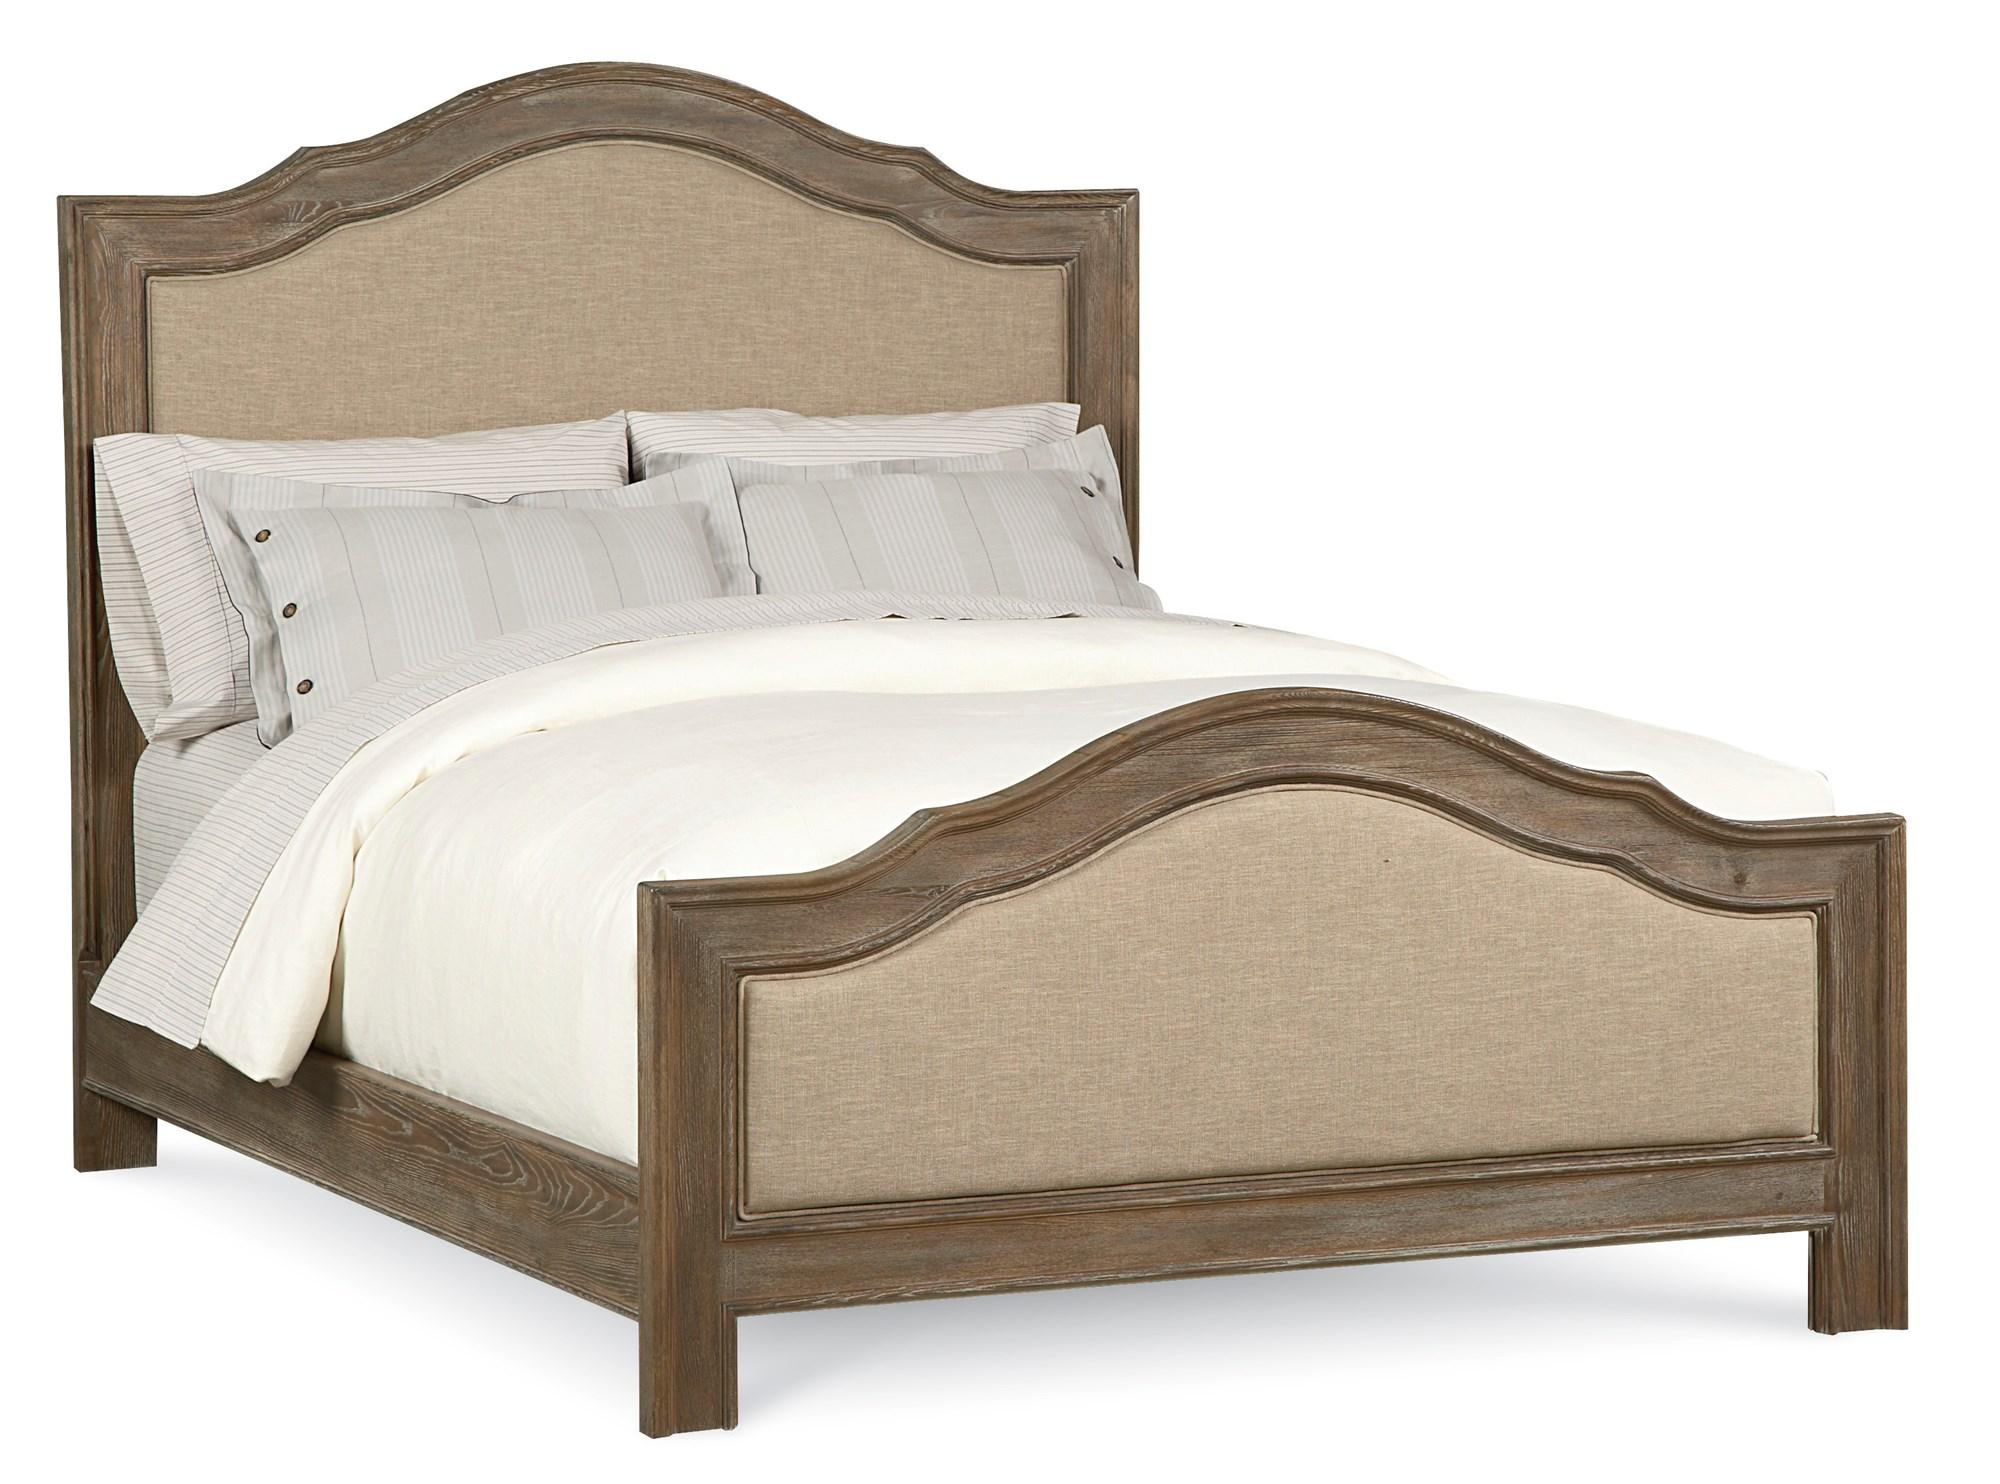 Traditional Sleigh Bed QUEEN UPHOLSTERED BED 8553-308 in Driftwood Fabric